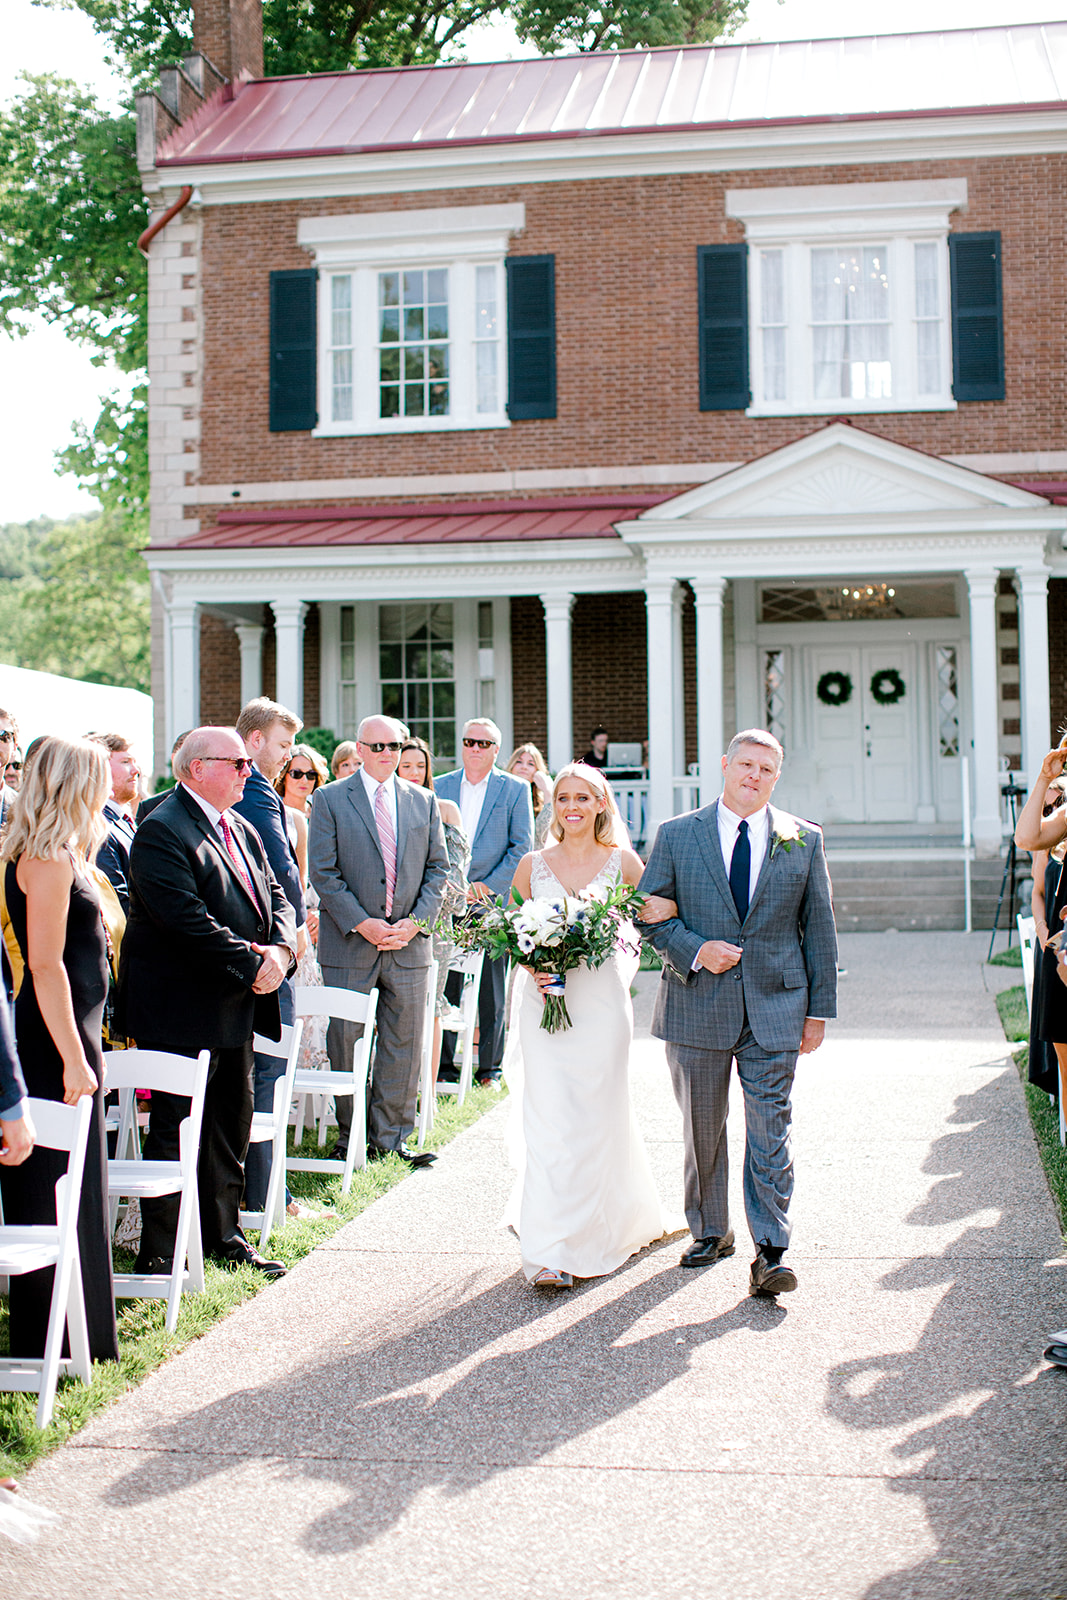 Outdoor wedding ceremony at Ravenswood Mansion